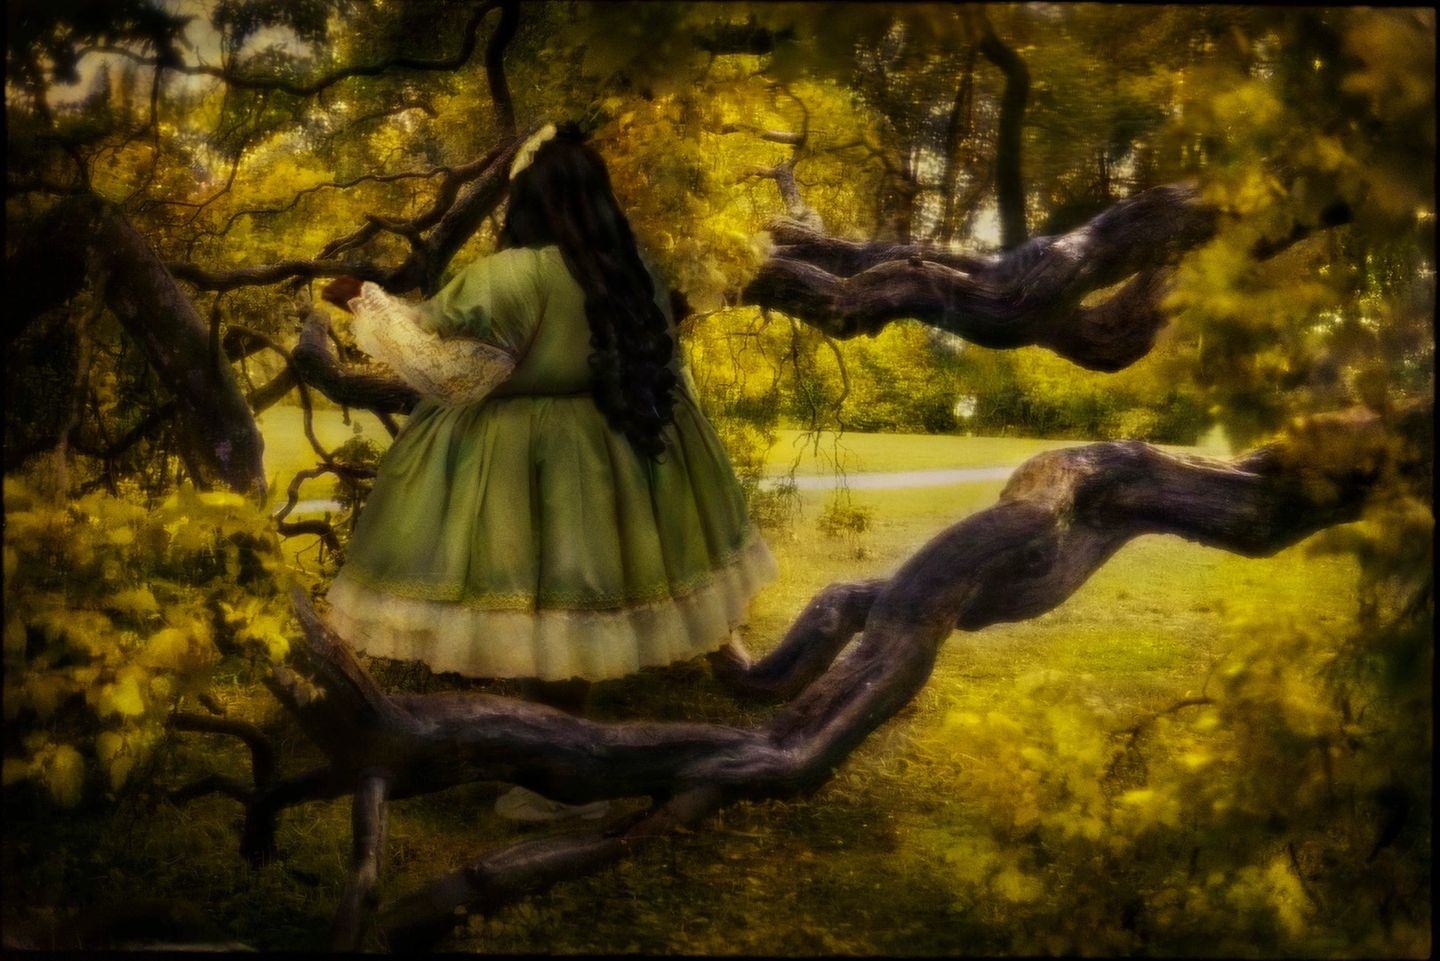 A woman in green dress standing on tree branch.